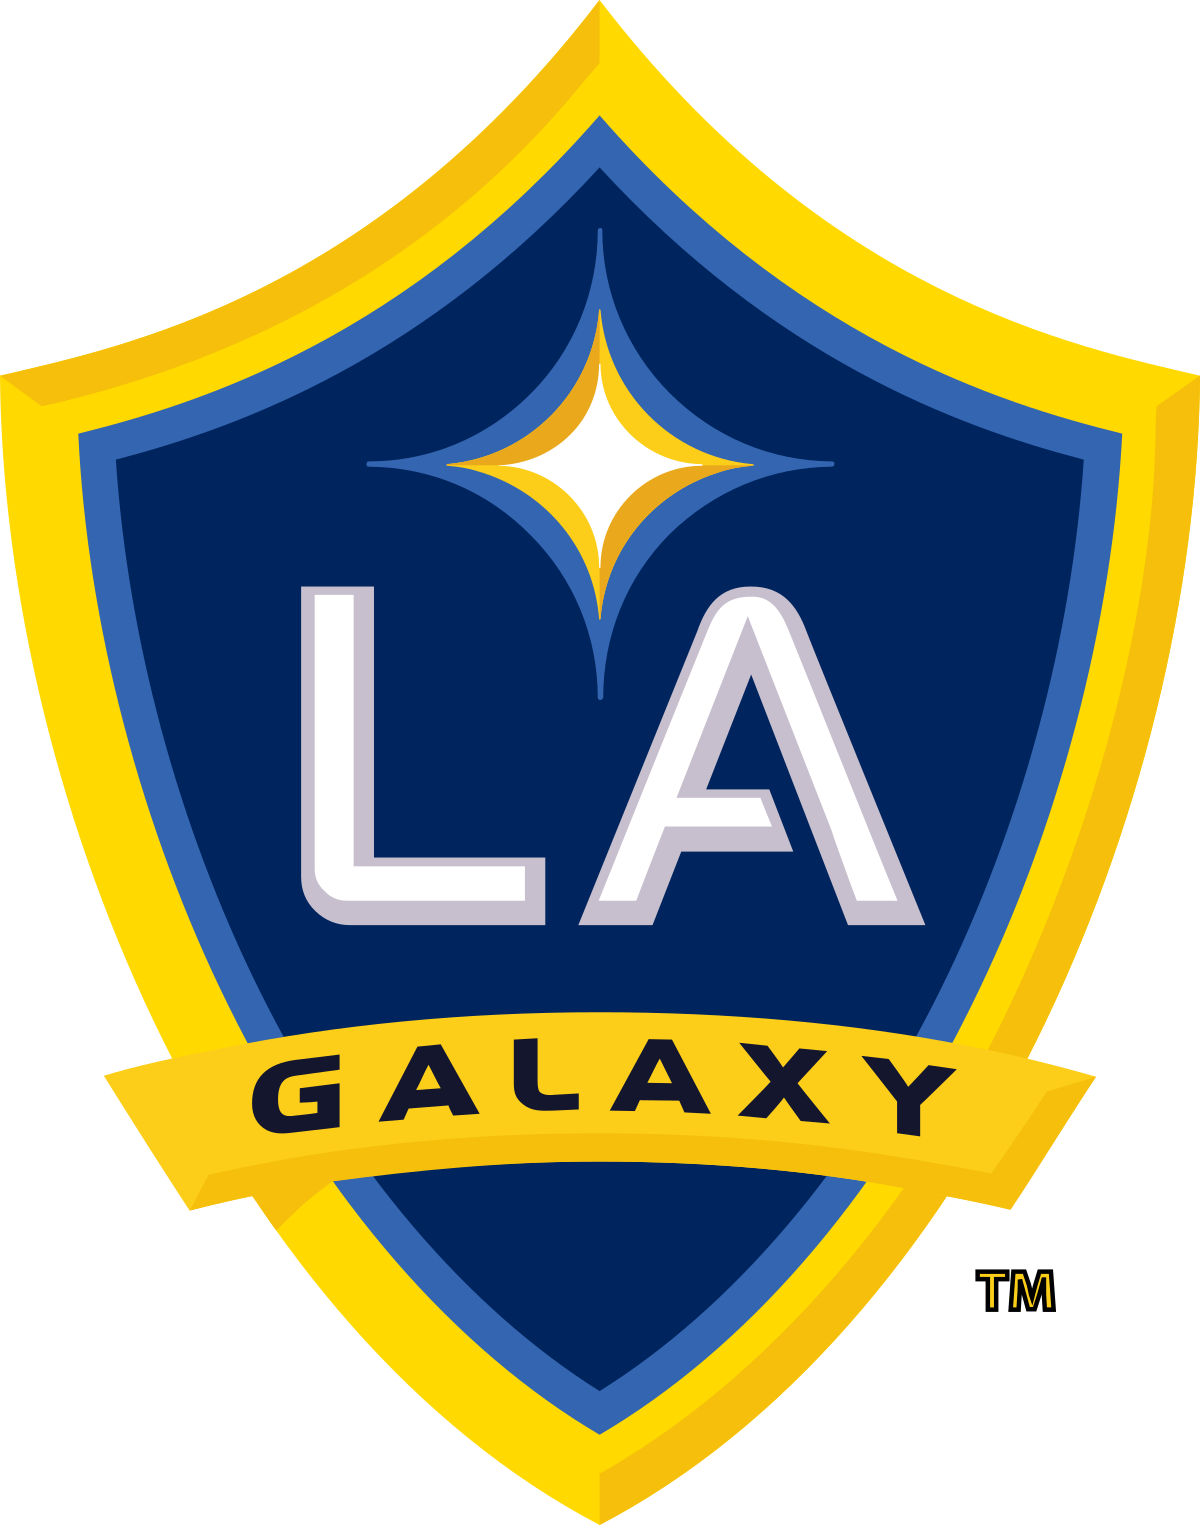 The LA Galaxy logo. The LA Galaxy were a sponsor of the 1st Annual Animal Heroes' Event, organized by Lady Freethinker.